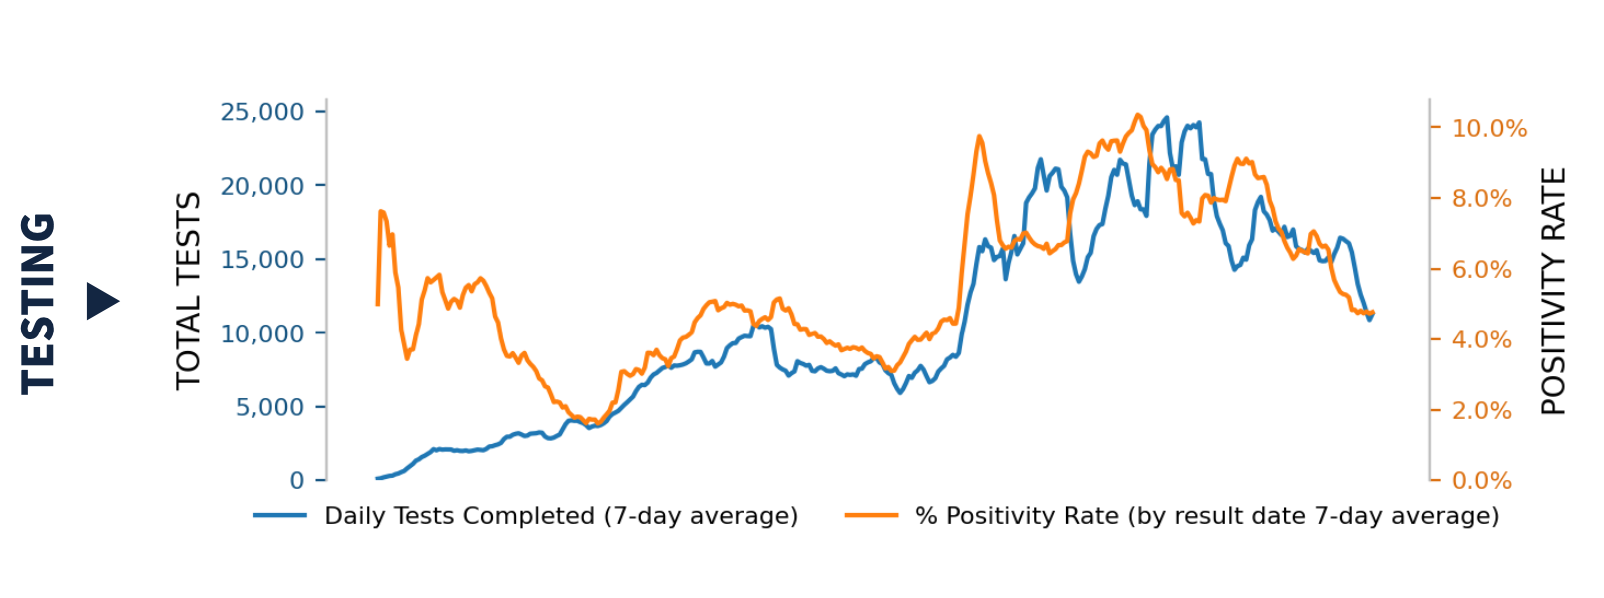 Line graph with two lines showing the 7-day average of the number of daily COVID-19 tests completed and the 7-day average of the test positivity rate over time in Oregon from early 2020 to March 2021. The 7-day average of daily tests completed in Oregon begins at 0, rises with significant fluctuations to a peak near 25,000 in early 2021, and then declines to about 11,000. The 7-day average of the test positivity rate begins at about 5%, dips and then rises with significant fluctuations to a peak near 10% in early 2021, then declines to about 5%.